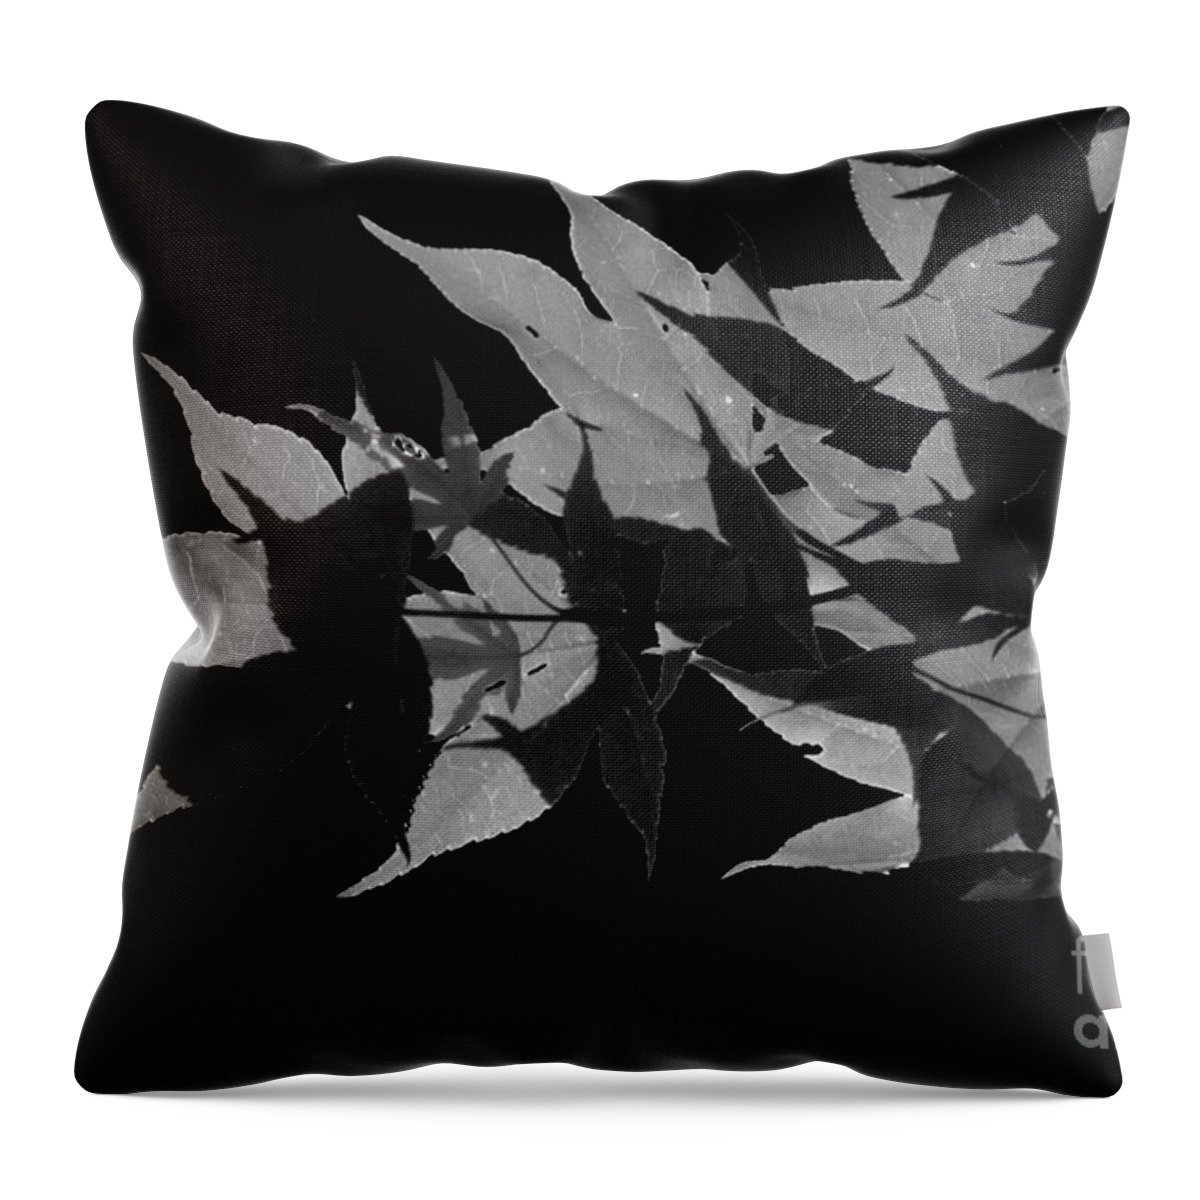 Leaves Throw Pillow featuring the photograph Leaf Shadows by Heather Applegate